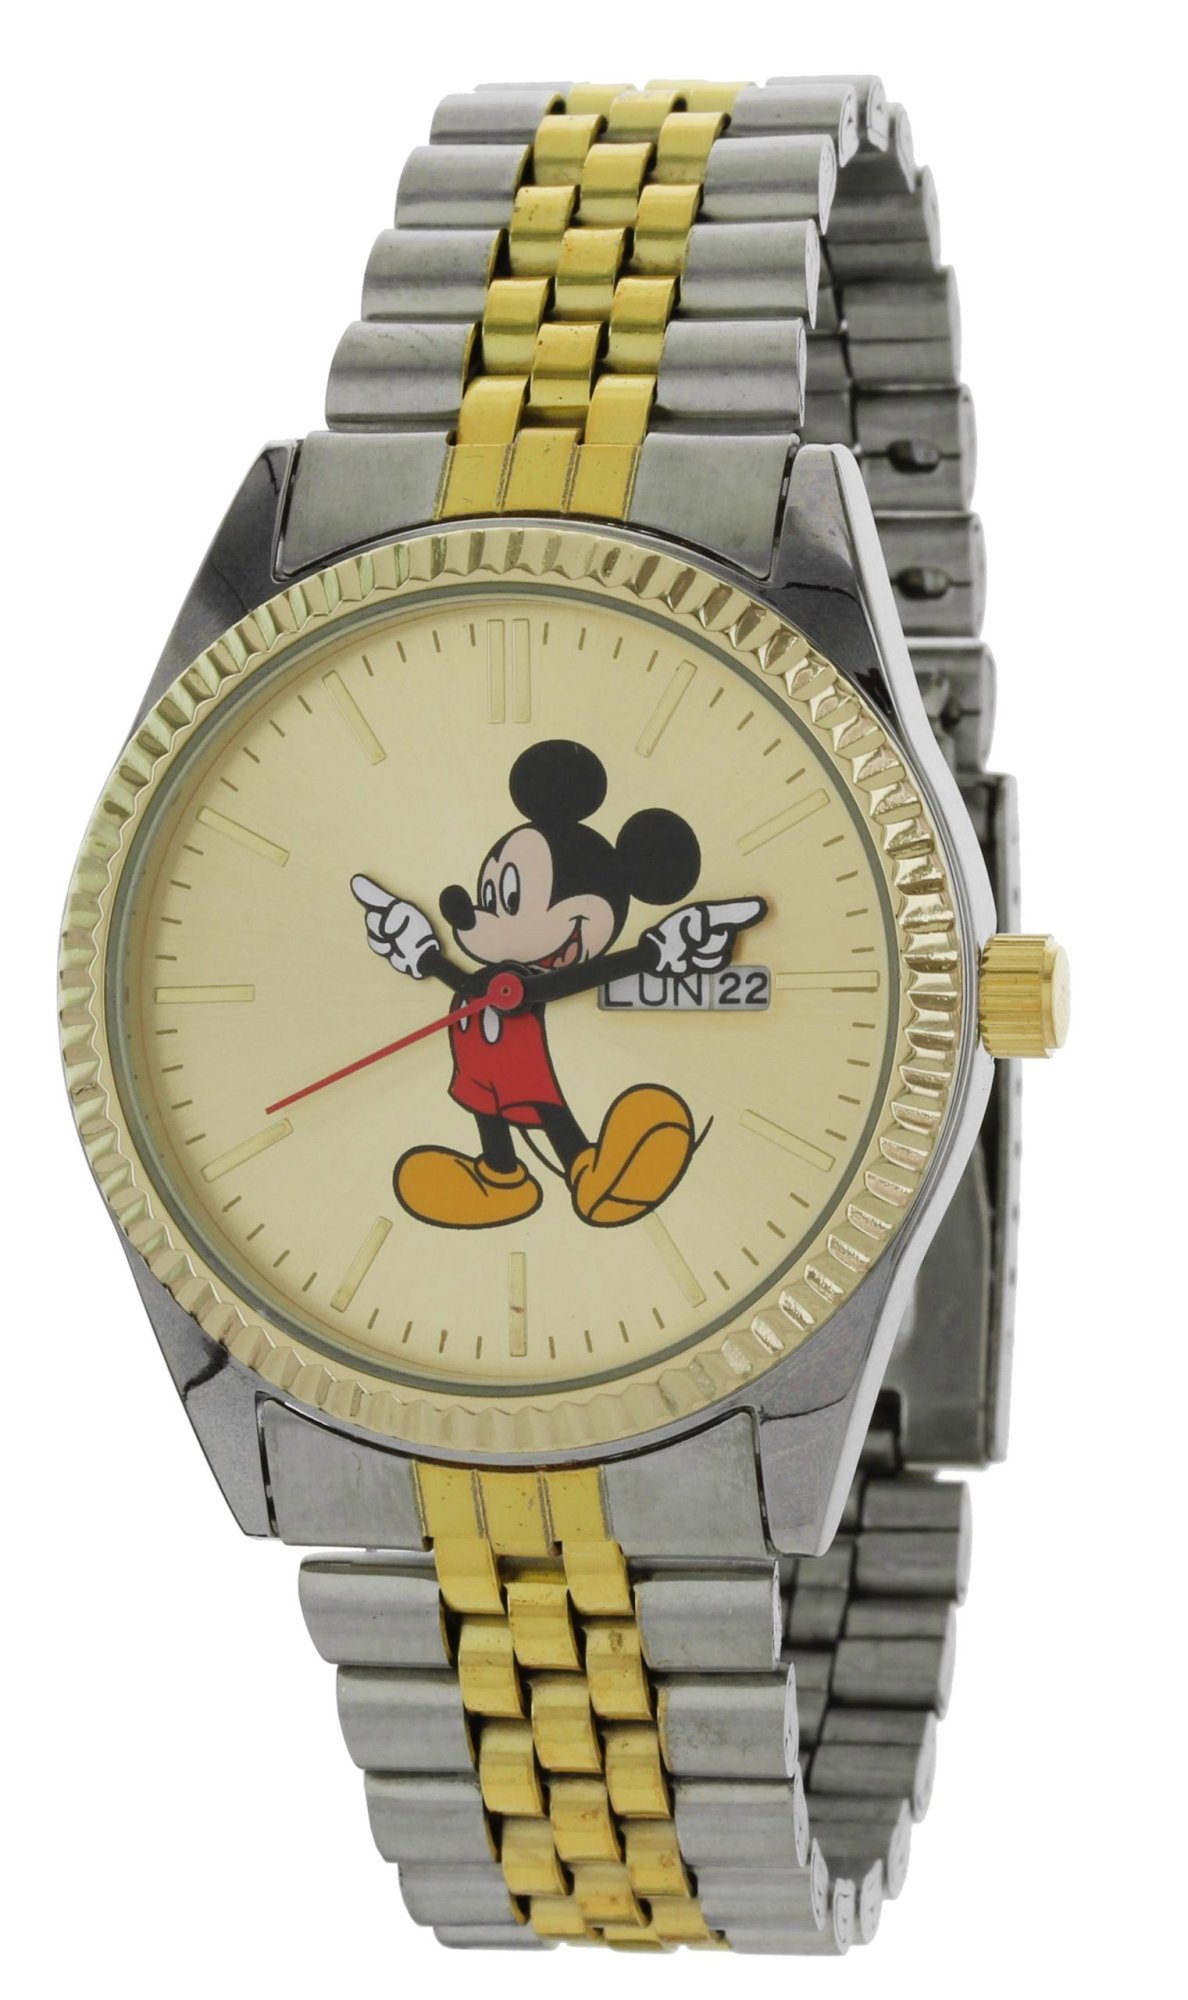 Model: Men's Mickey Mouse Watch in Gold and Silver with Day and Date